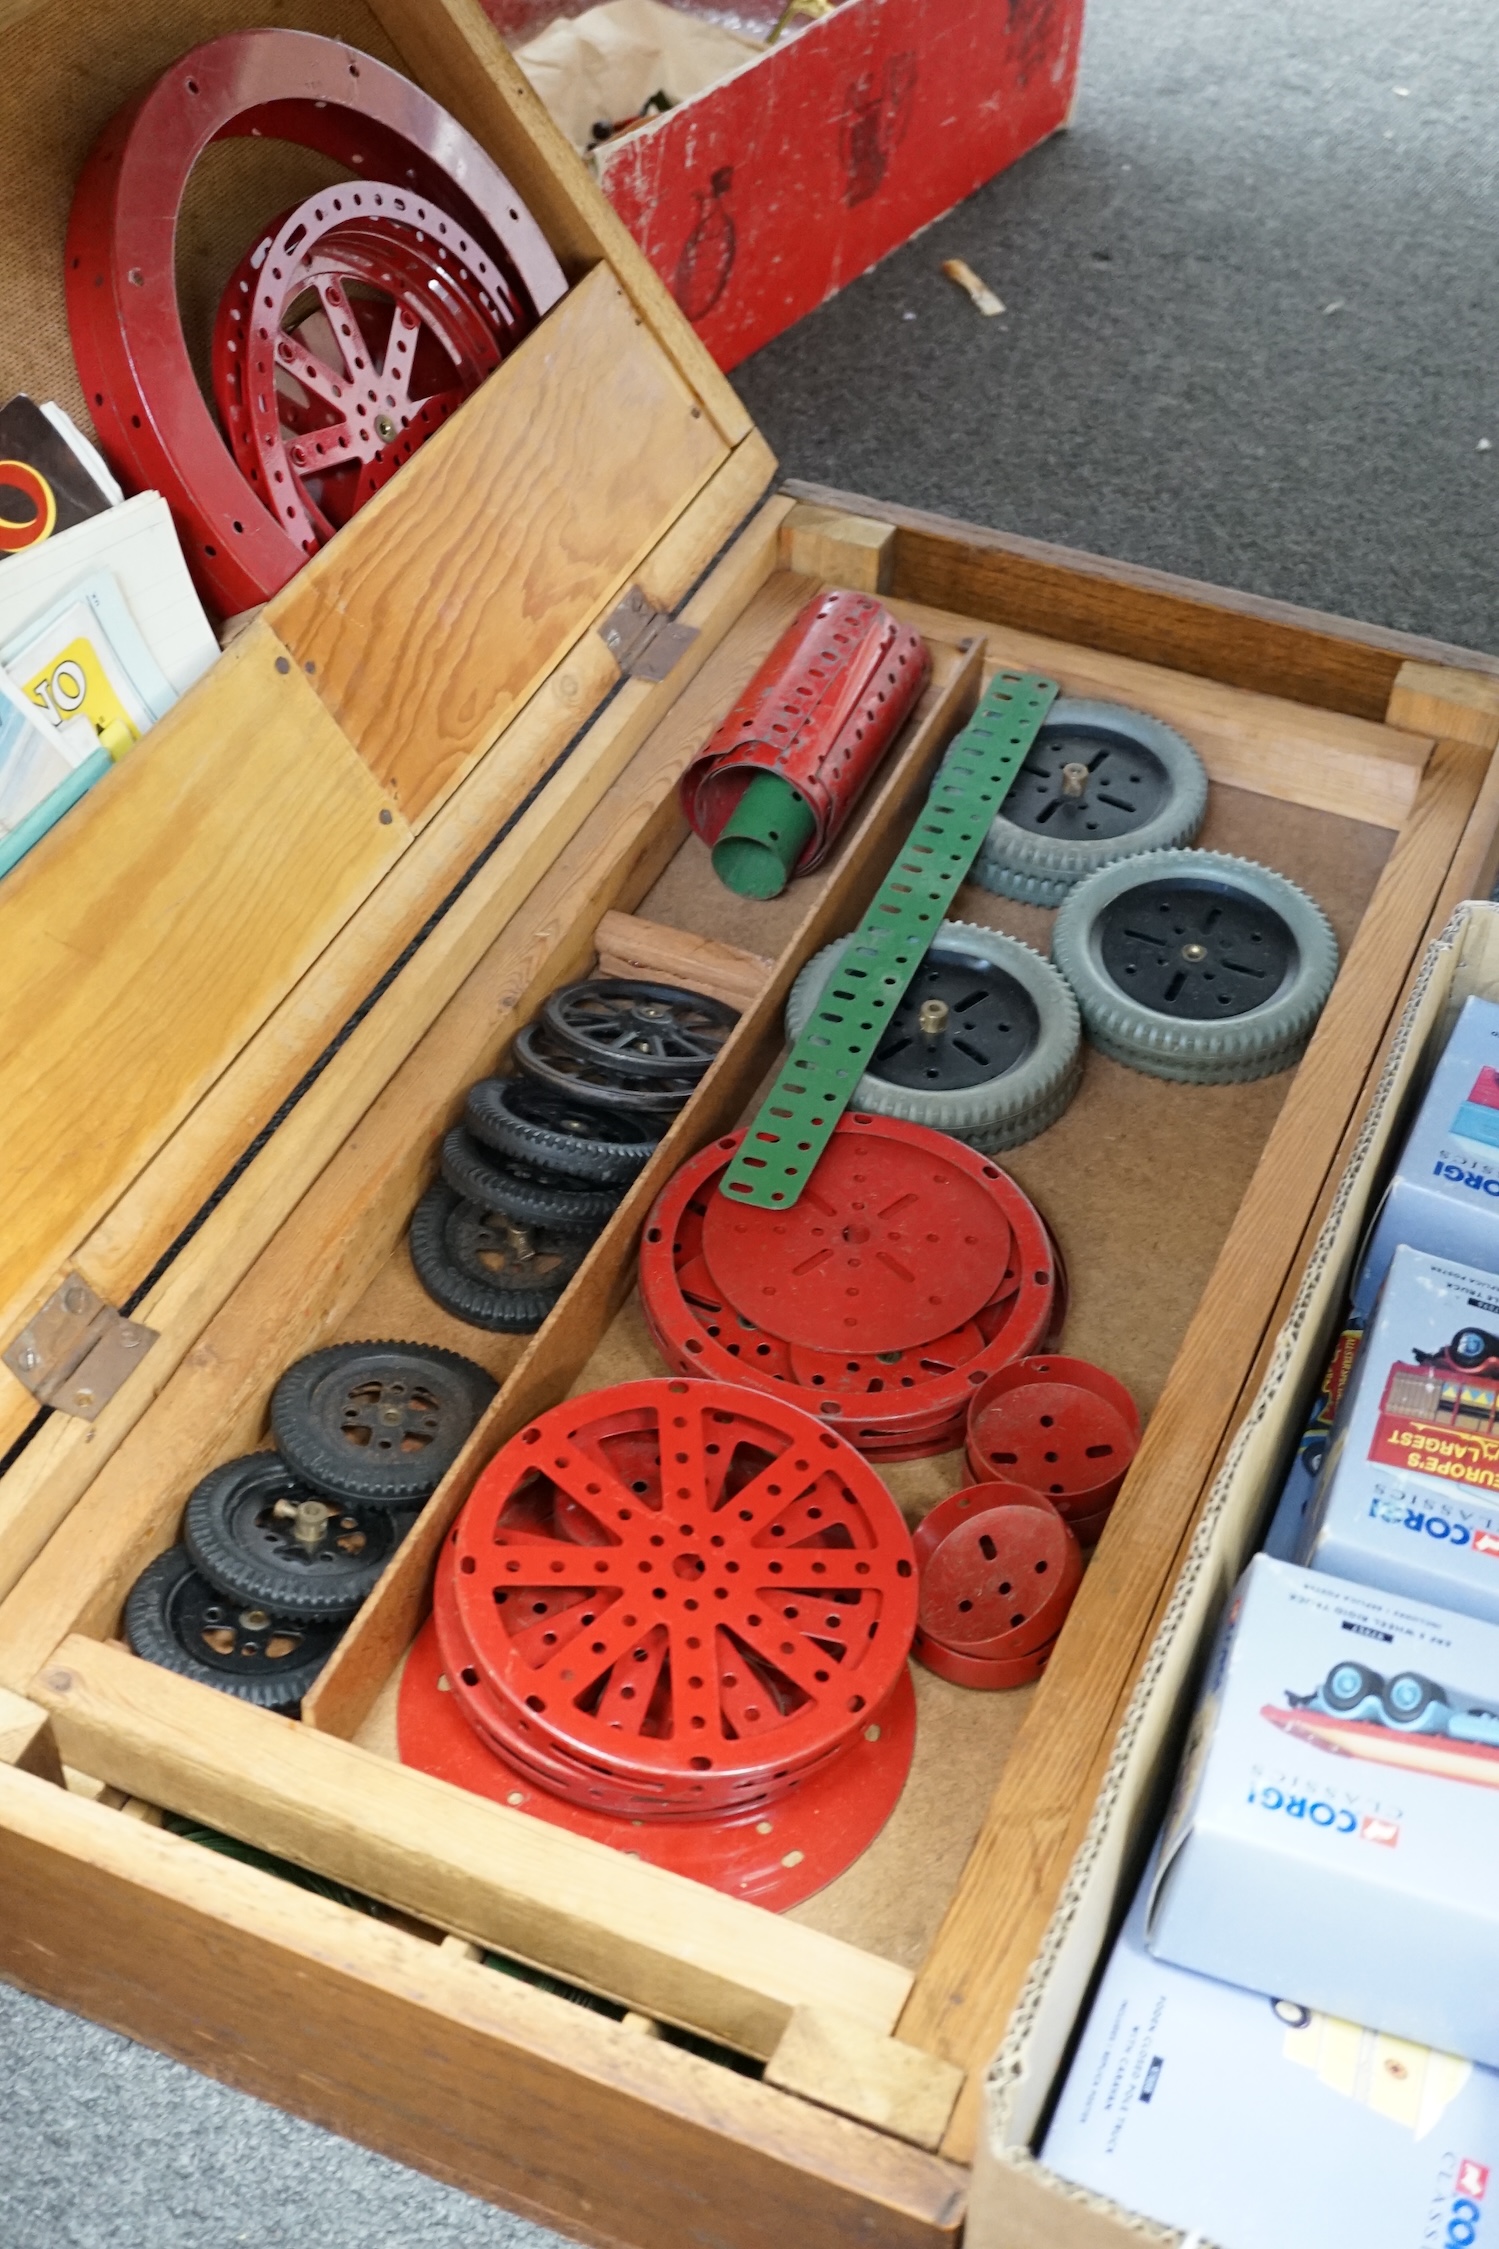 A collection of early Meccano components, mainly from the red and green period, comprising of some of the more unusual wheels and circular parts, some instruction books, etc. well organised into two wooden boxes